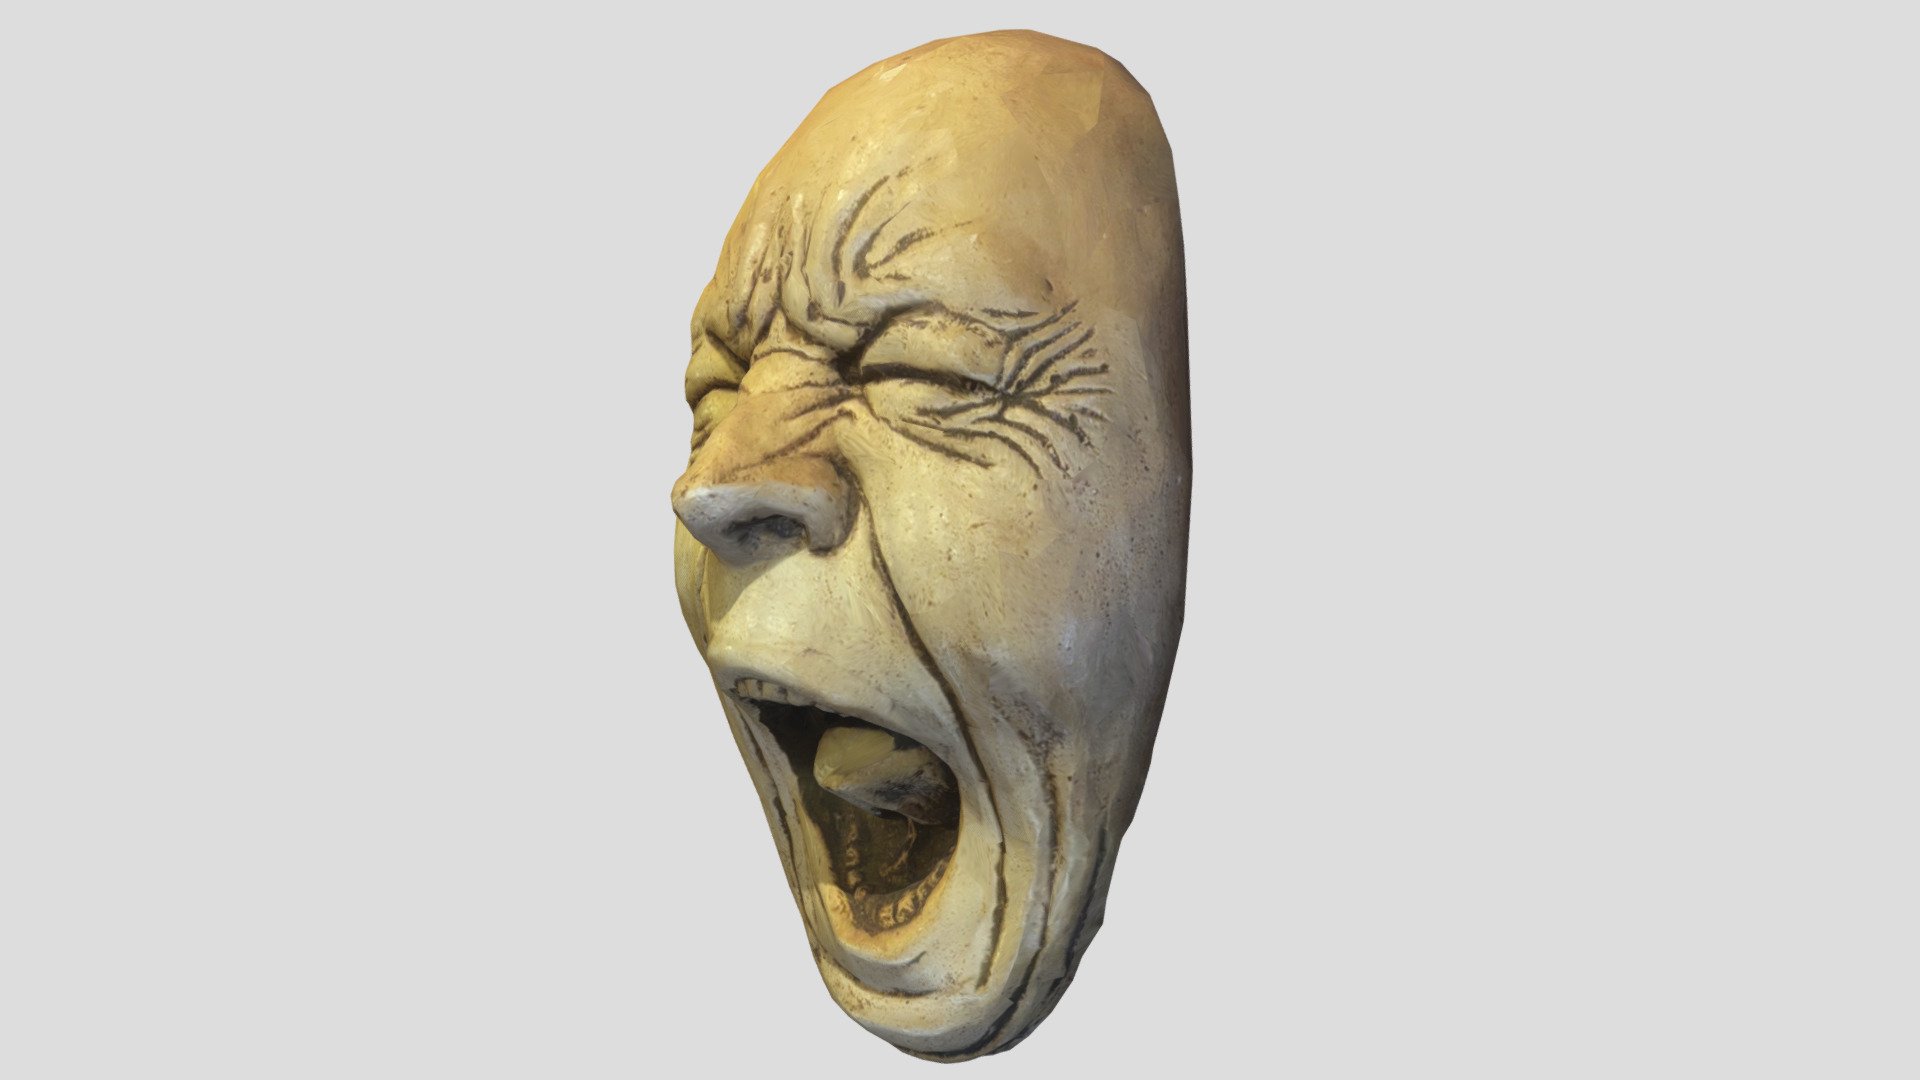 This is a scan of a screaming face made out of stone. I have it hanging on my wall 3d model